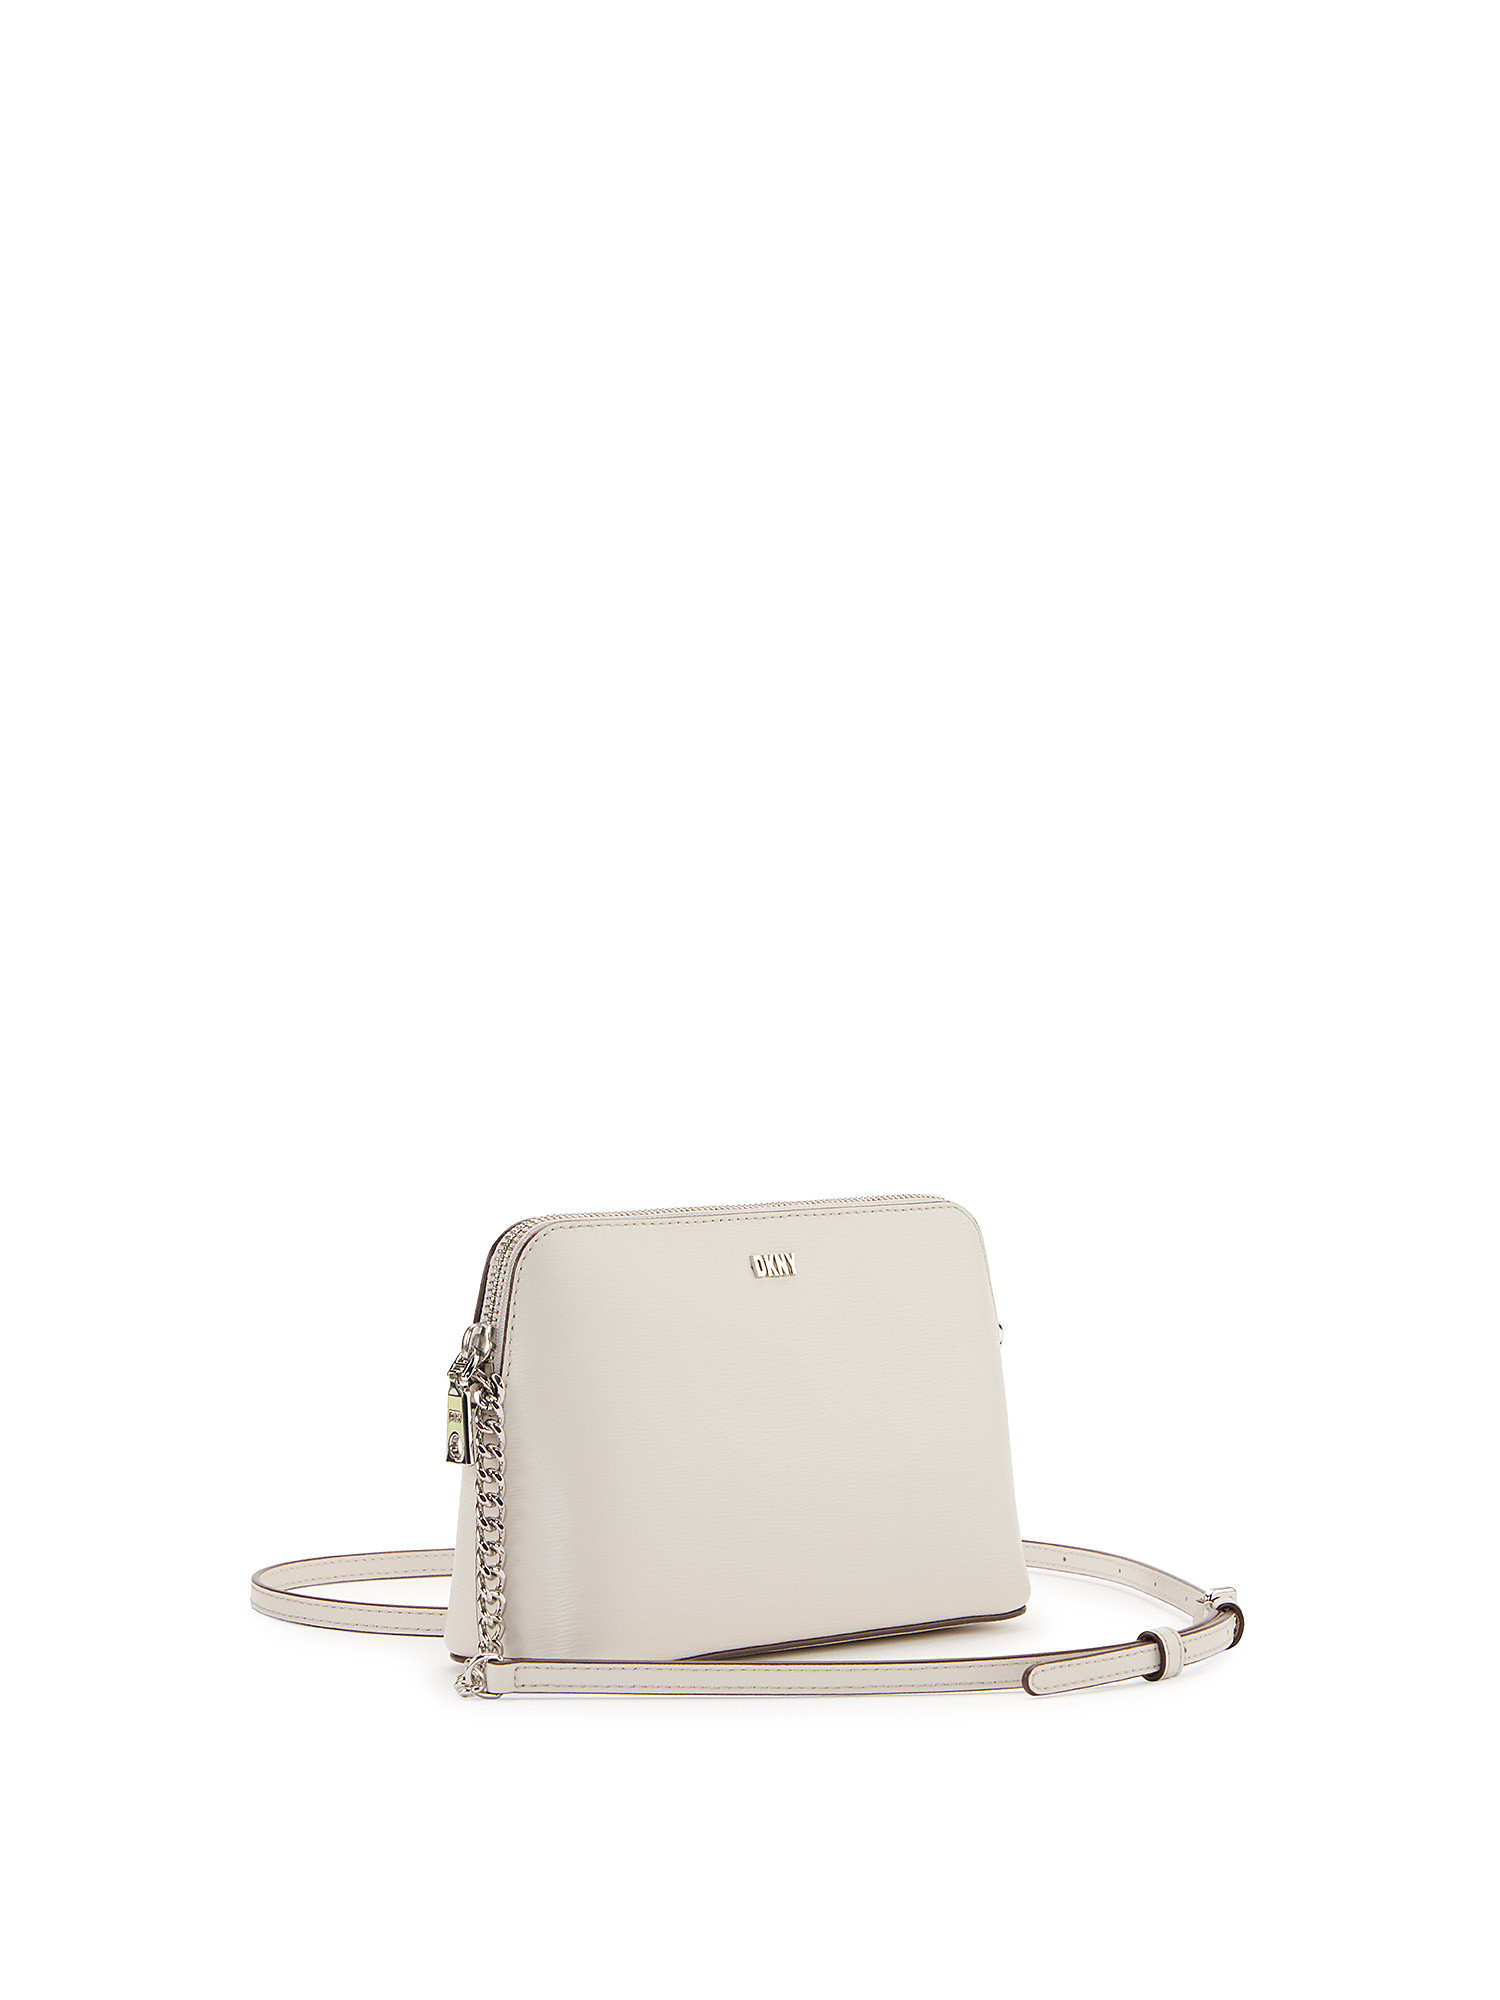 Dkny - Shoulder bag with chain and silver logo, White, large image number 1